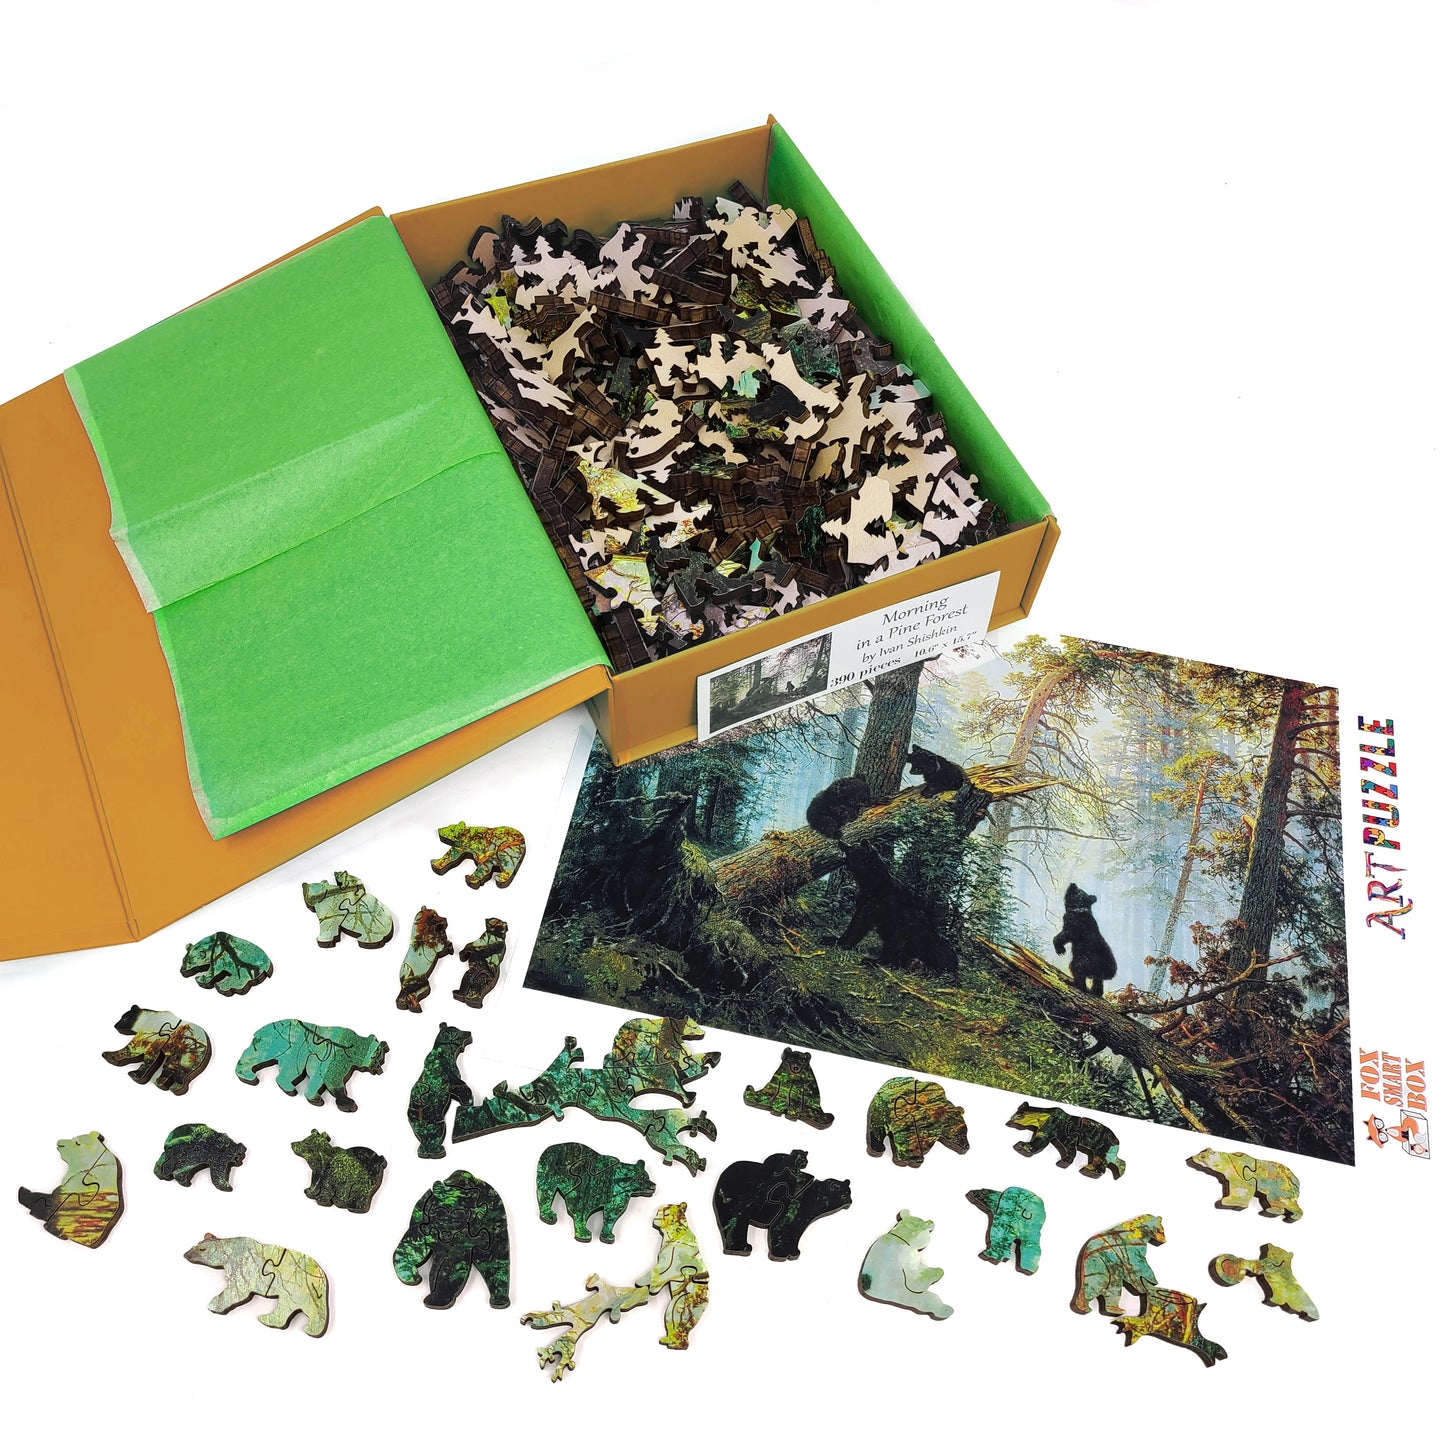 Wooden Jigsaw Puzzle with Uniquely Shaped Pieces for Adults - 390 Pieces - Morning in a Pine Forest